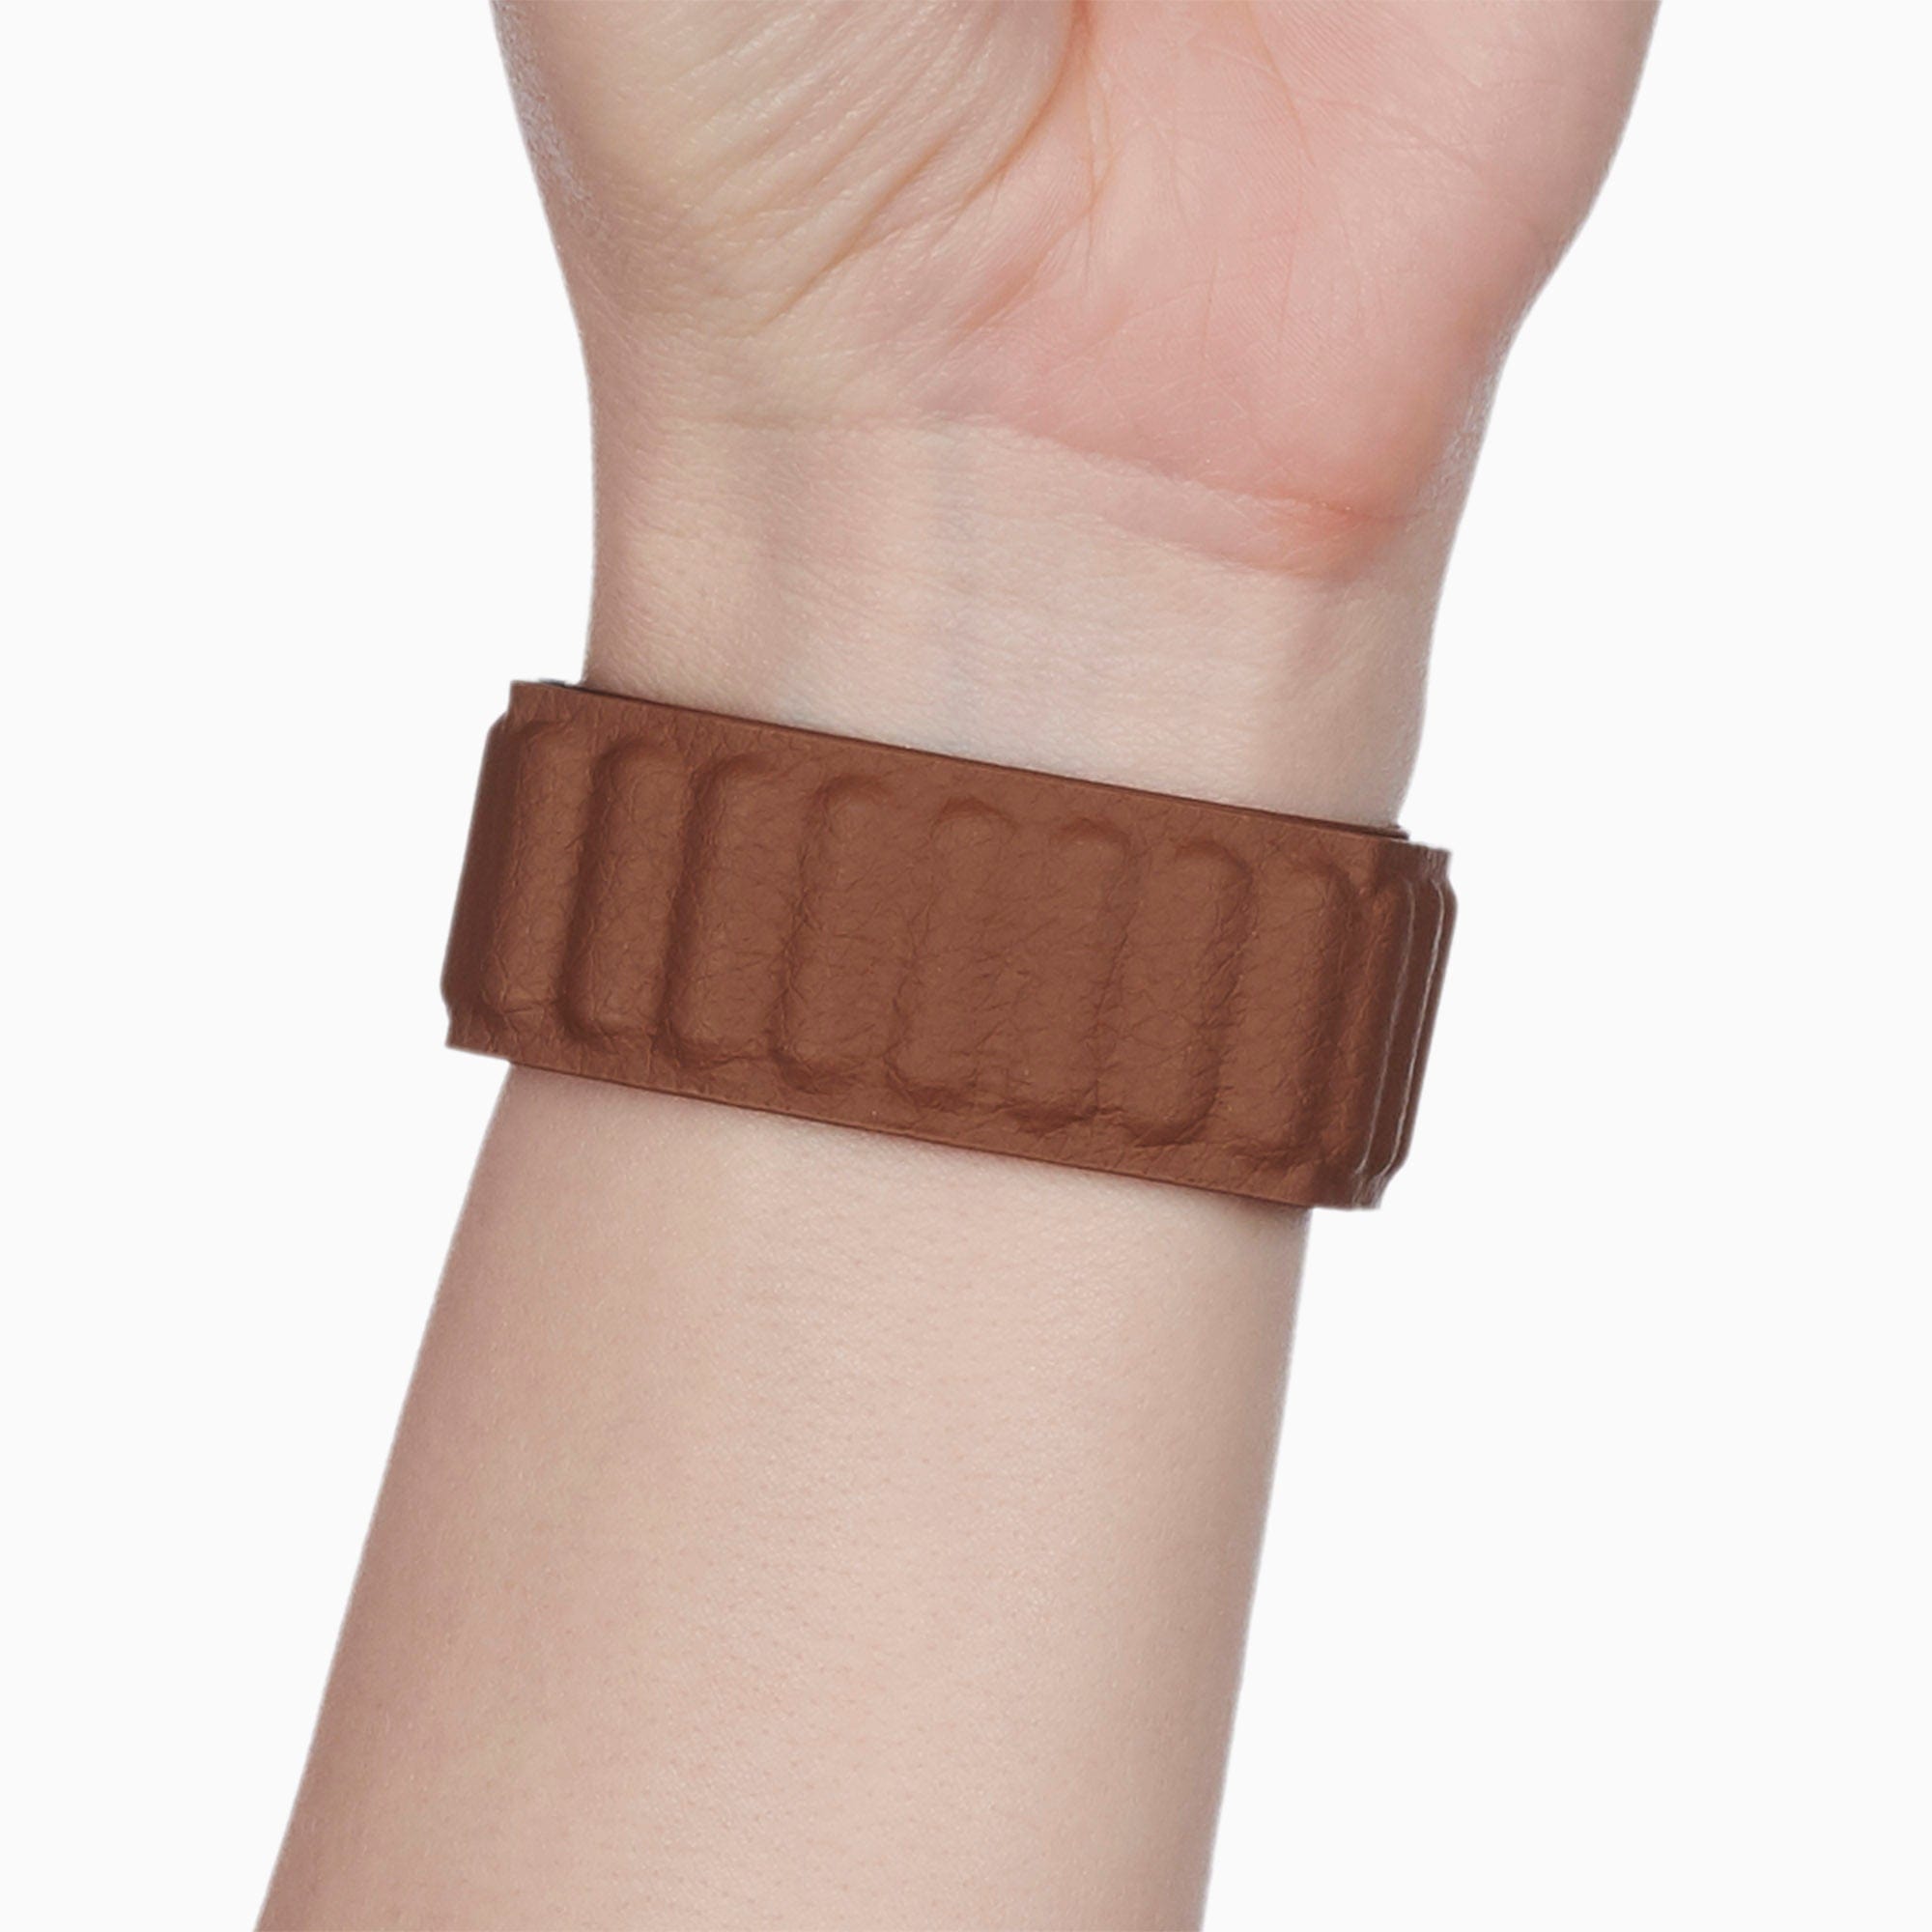 Are FineWoven Apple Watch bands really better than leather ones?